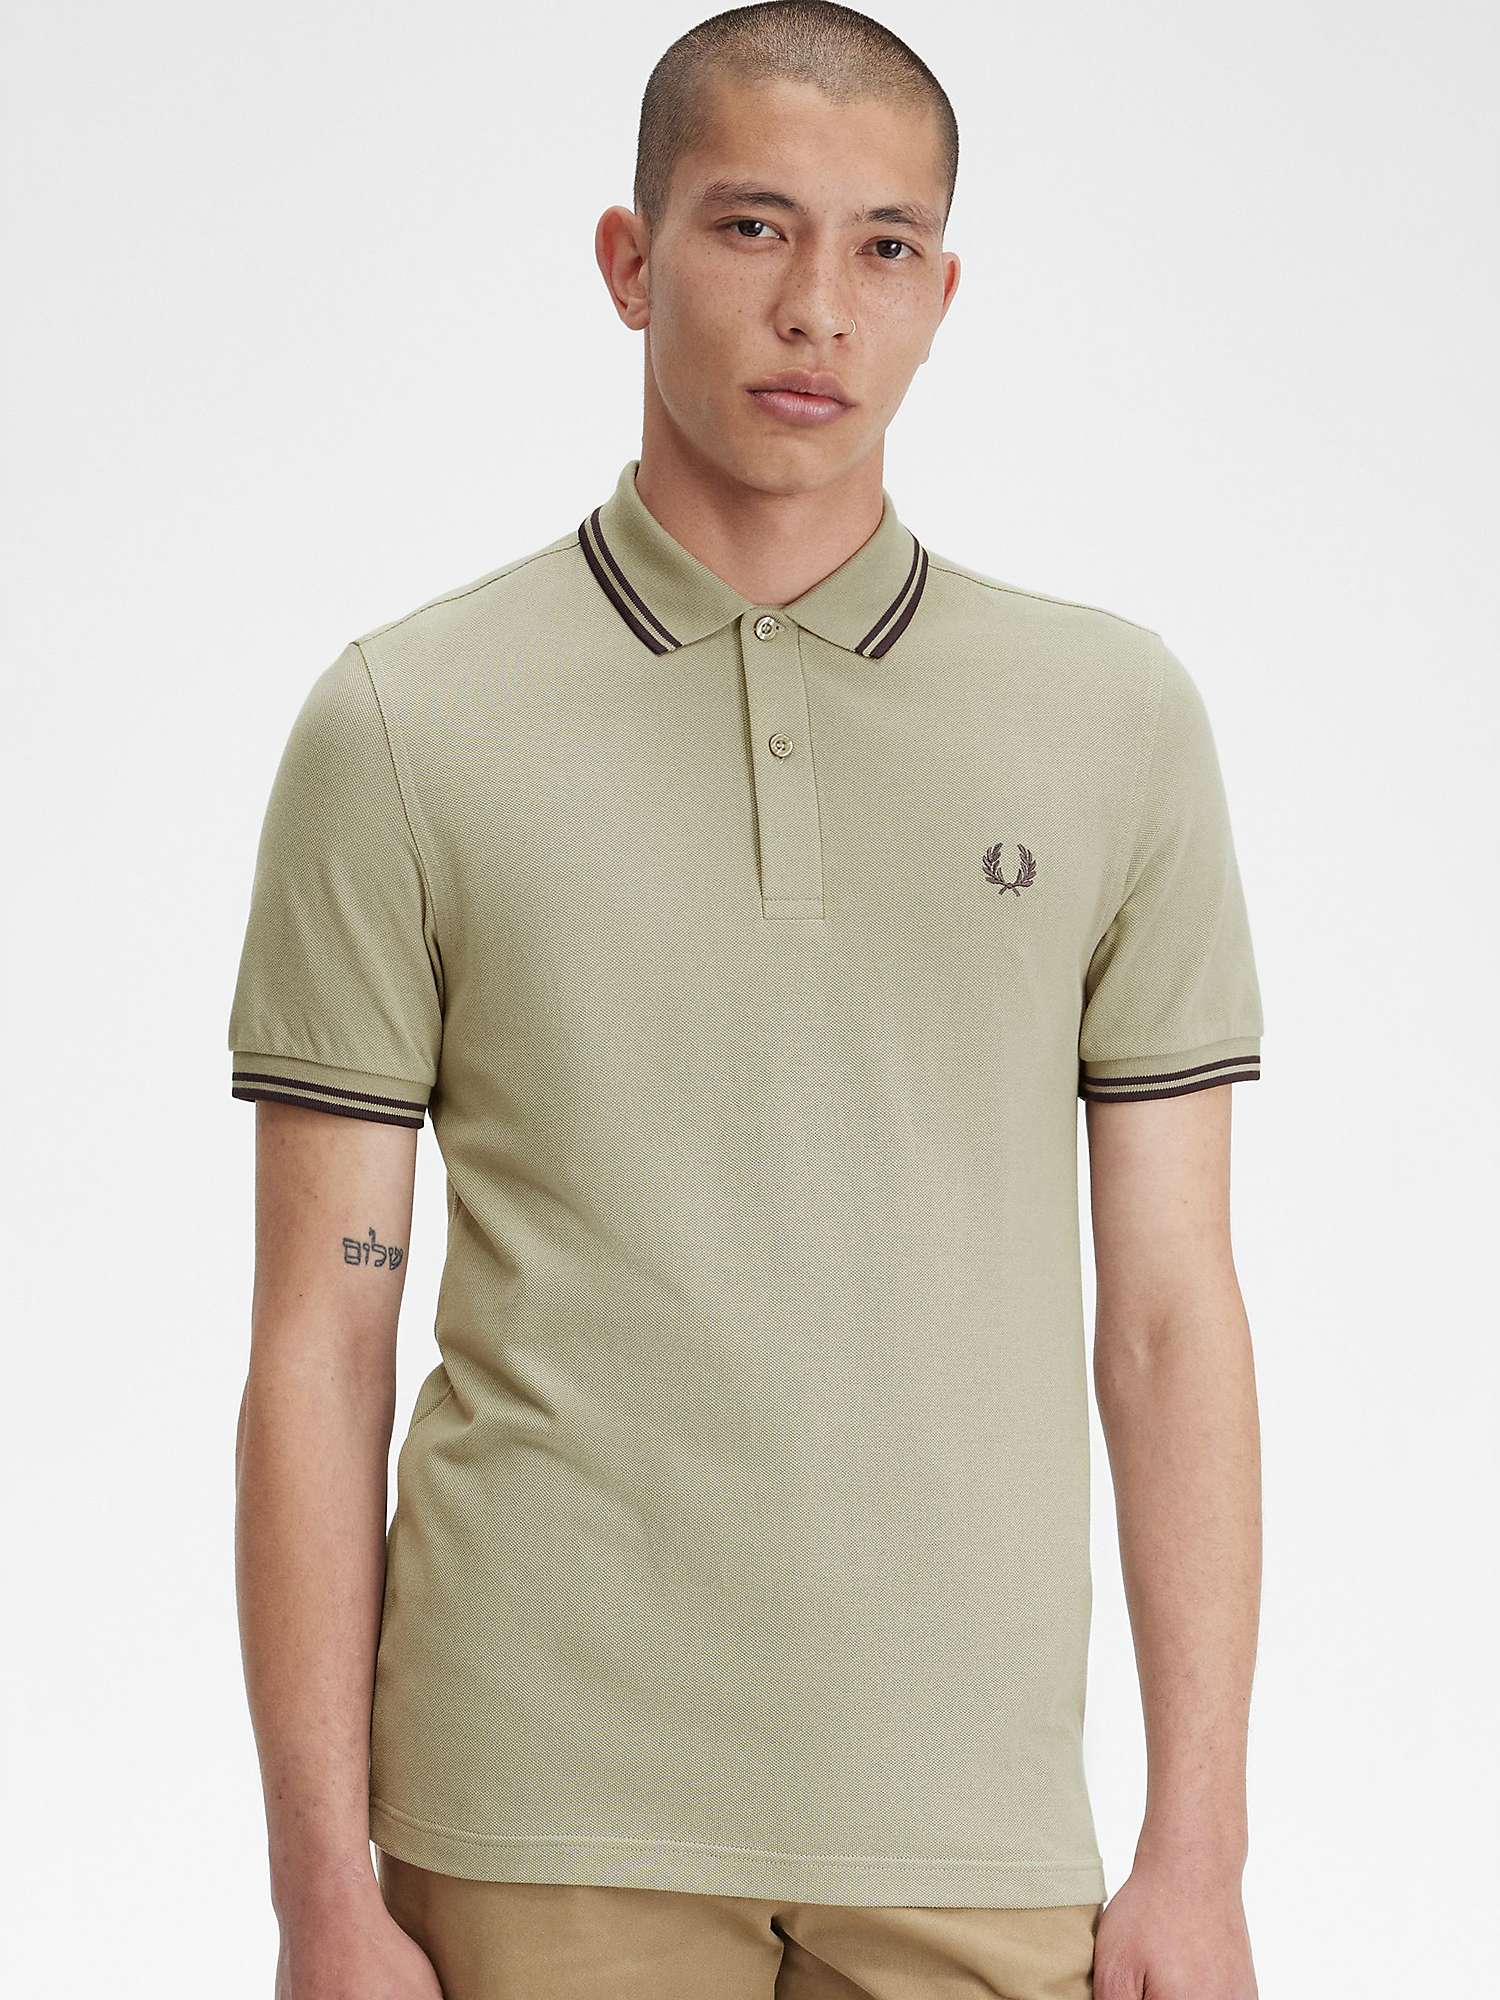 Buy Fred Perry The Twin Tipped Short Sleeve T-Shirt Online at johnlewis.com